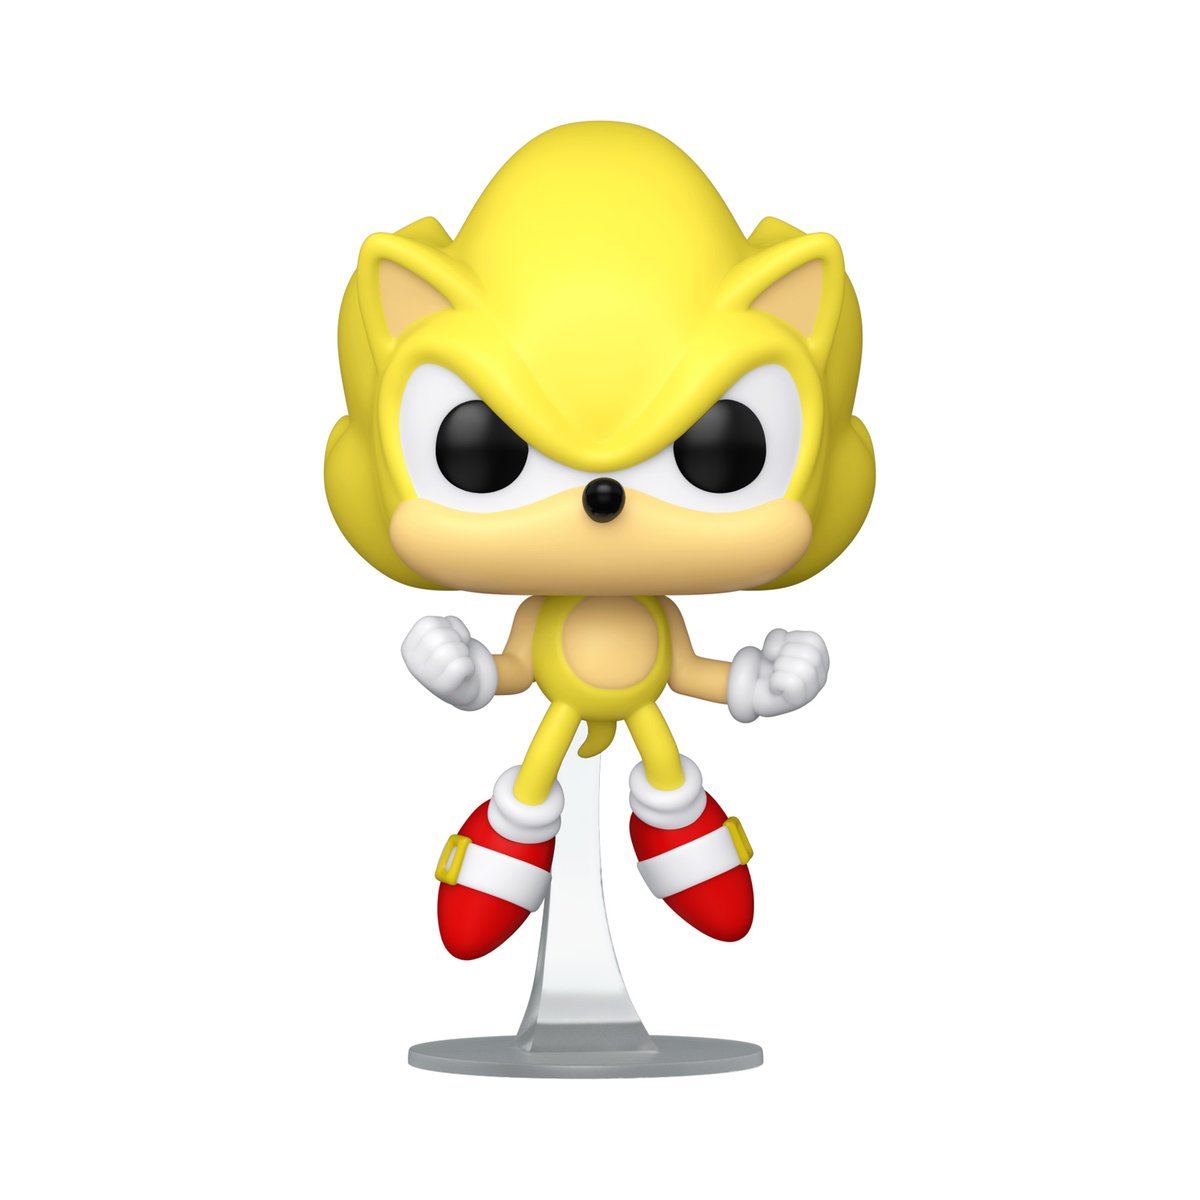 RT and follow @OriginalFunko for the chance to WIN the San Diego Comic Con exclusive Glow in the Dark Sonic the Hedgehog: Super Sonic POP! #Funko #FunkoPOP #Giveaway #SDCC @sonic_hedgehog